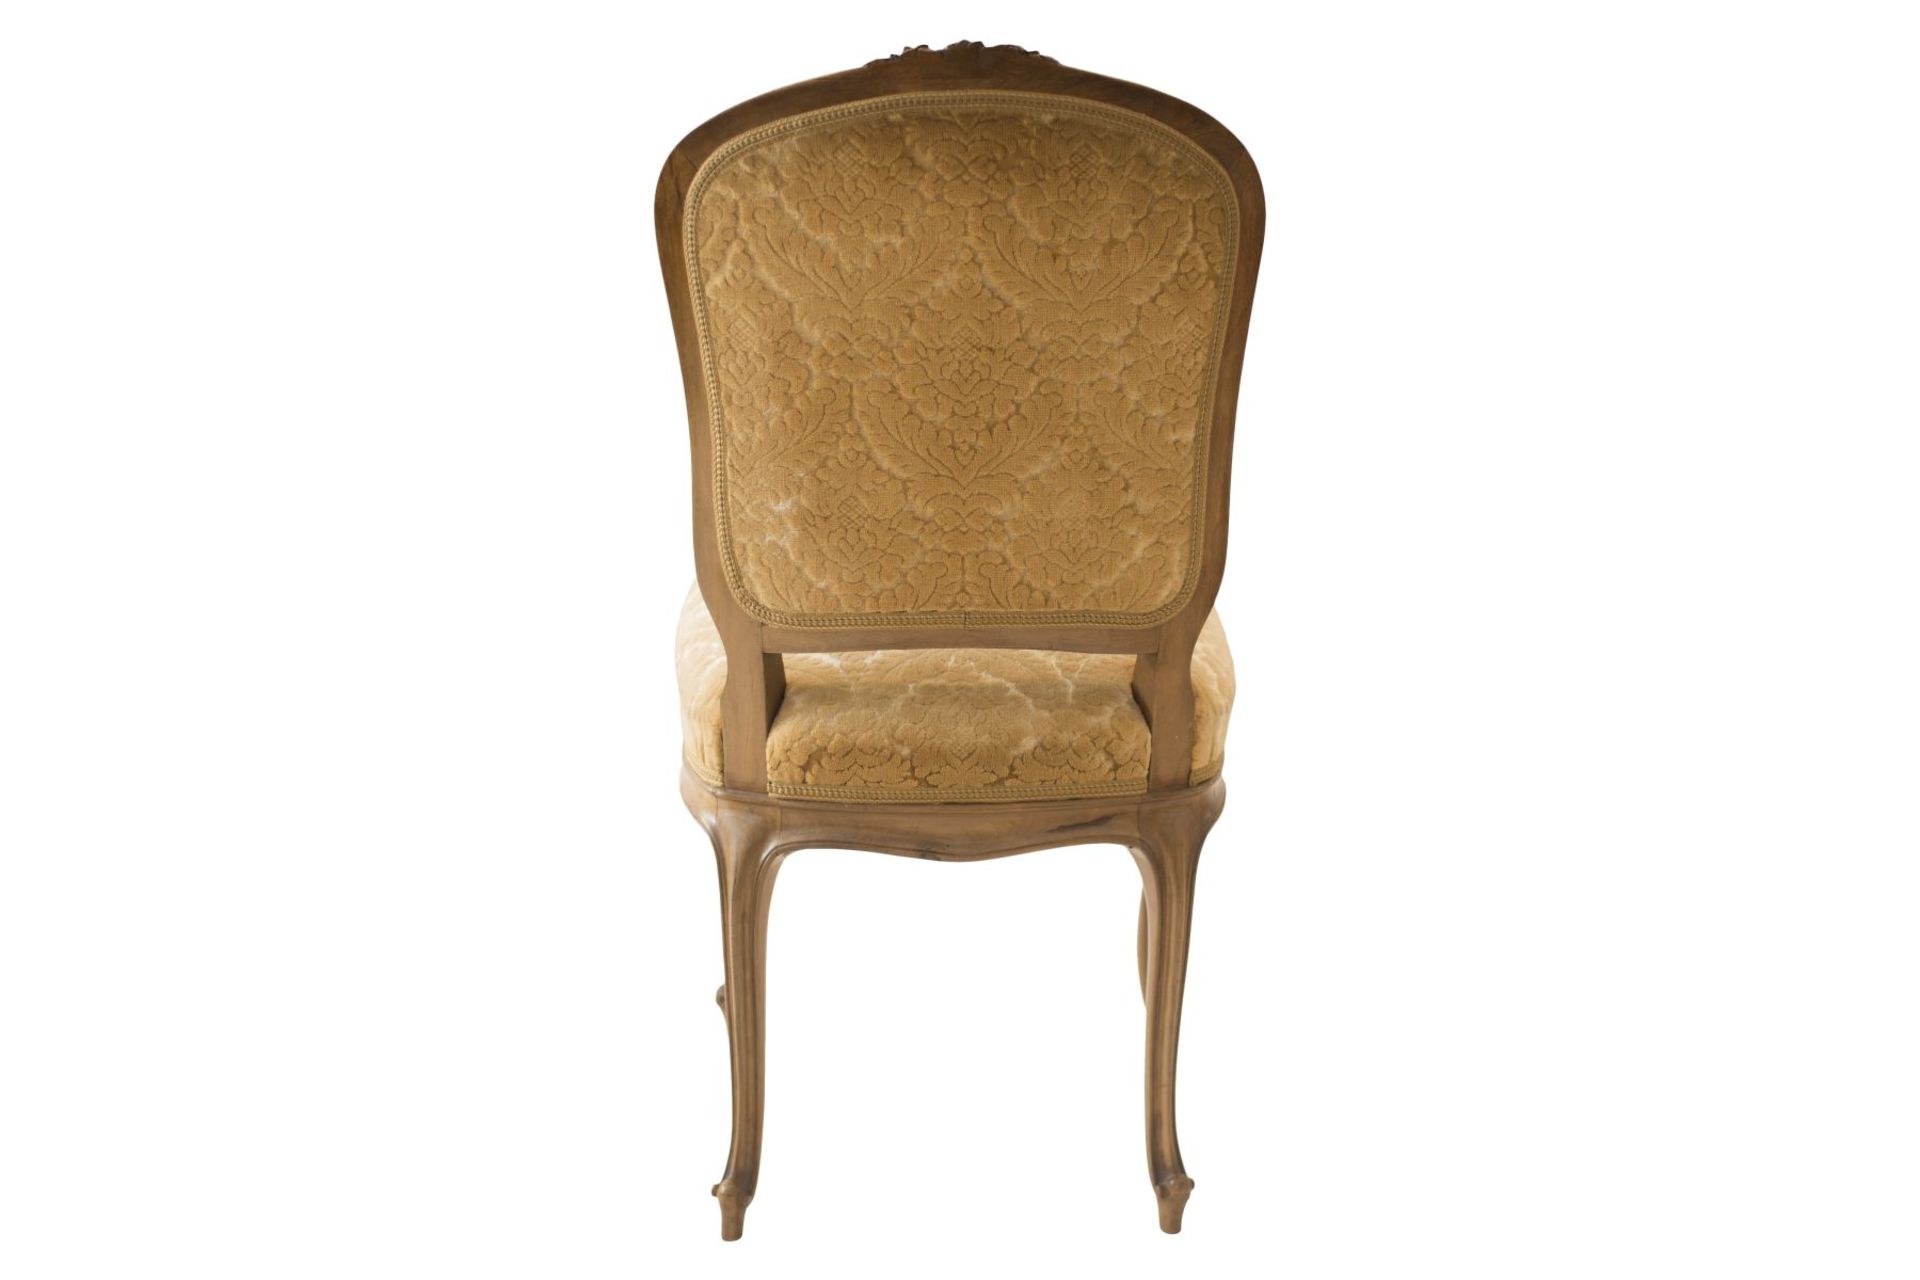 6 Dining Room Chairs | 6 Esszimmer Stuehle - Image 4 of 6